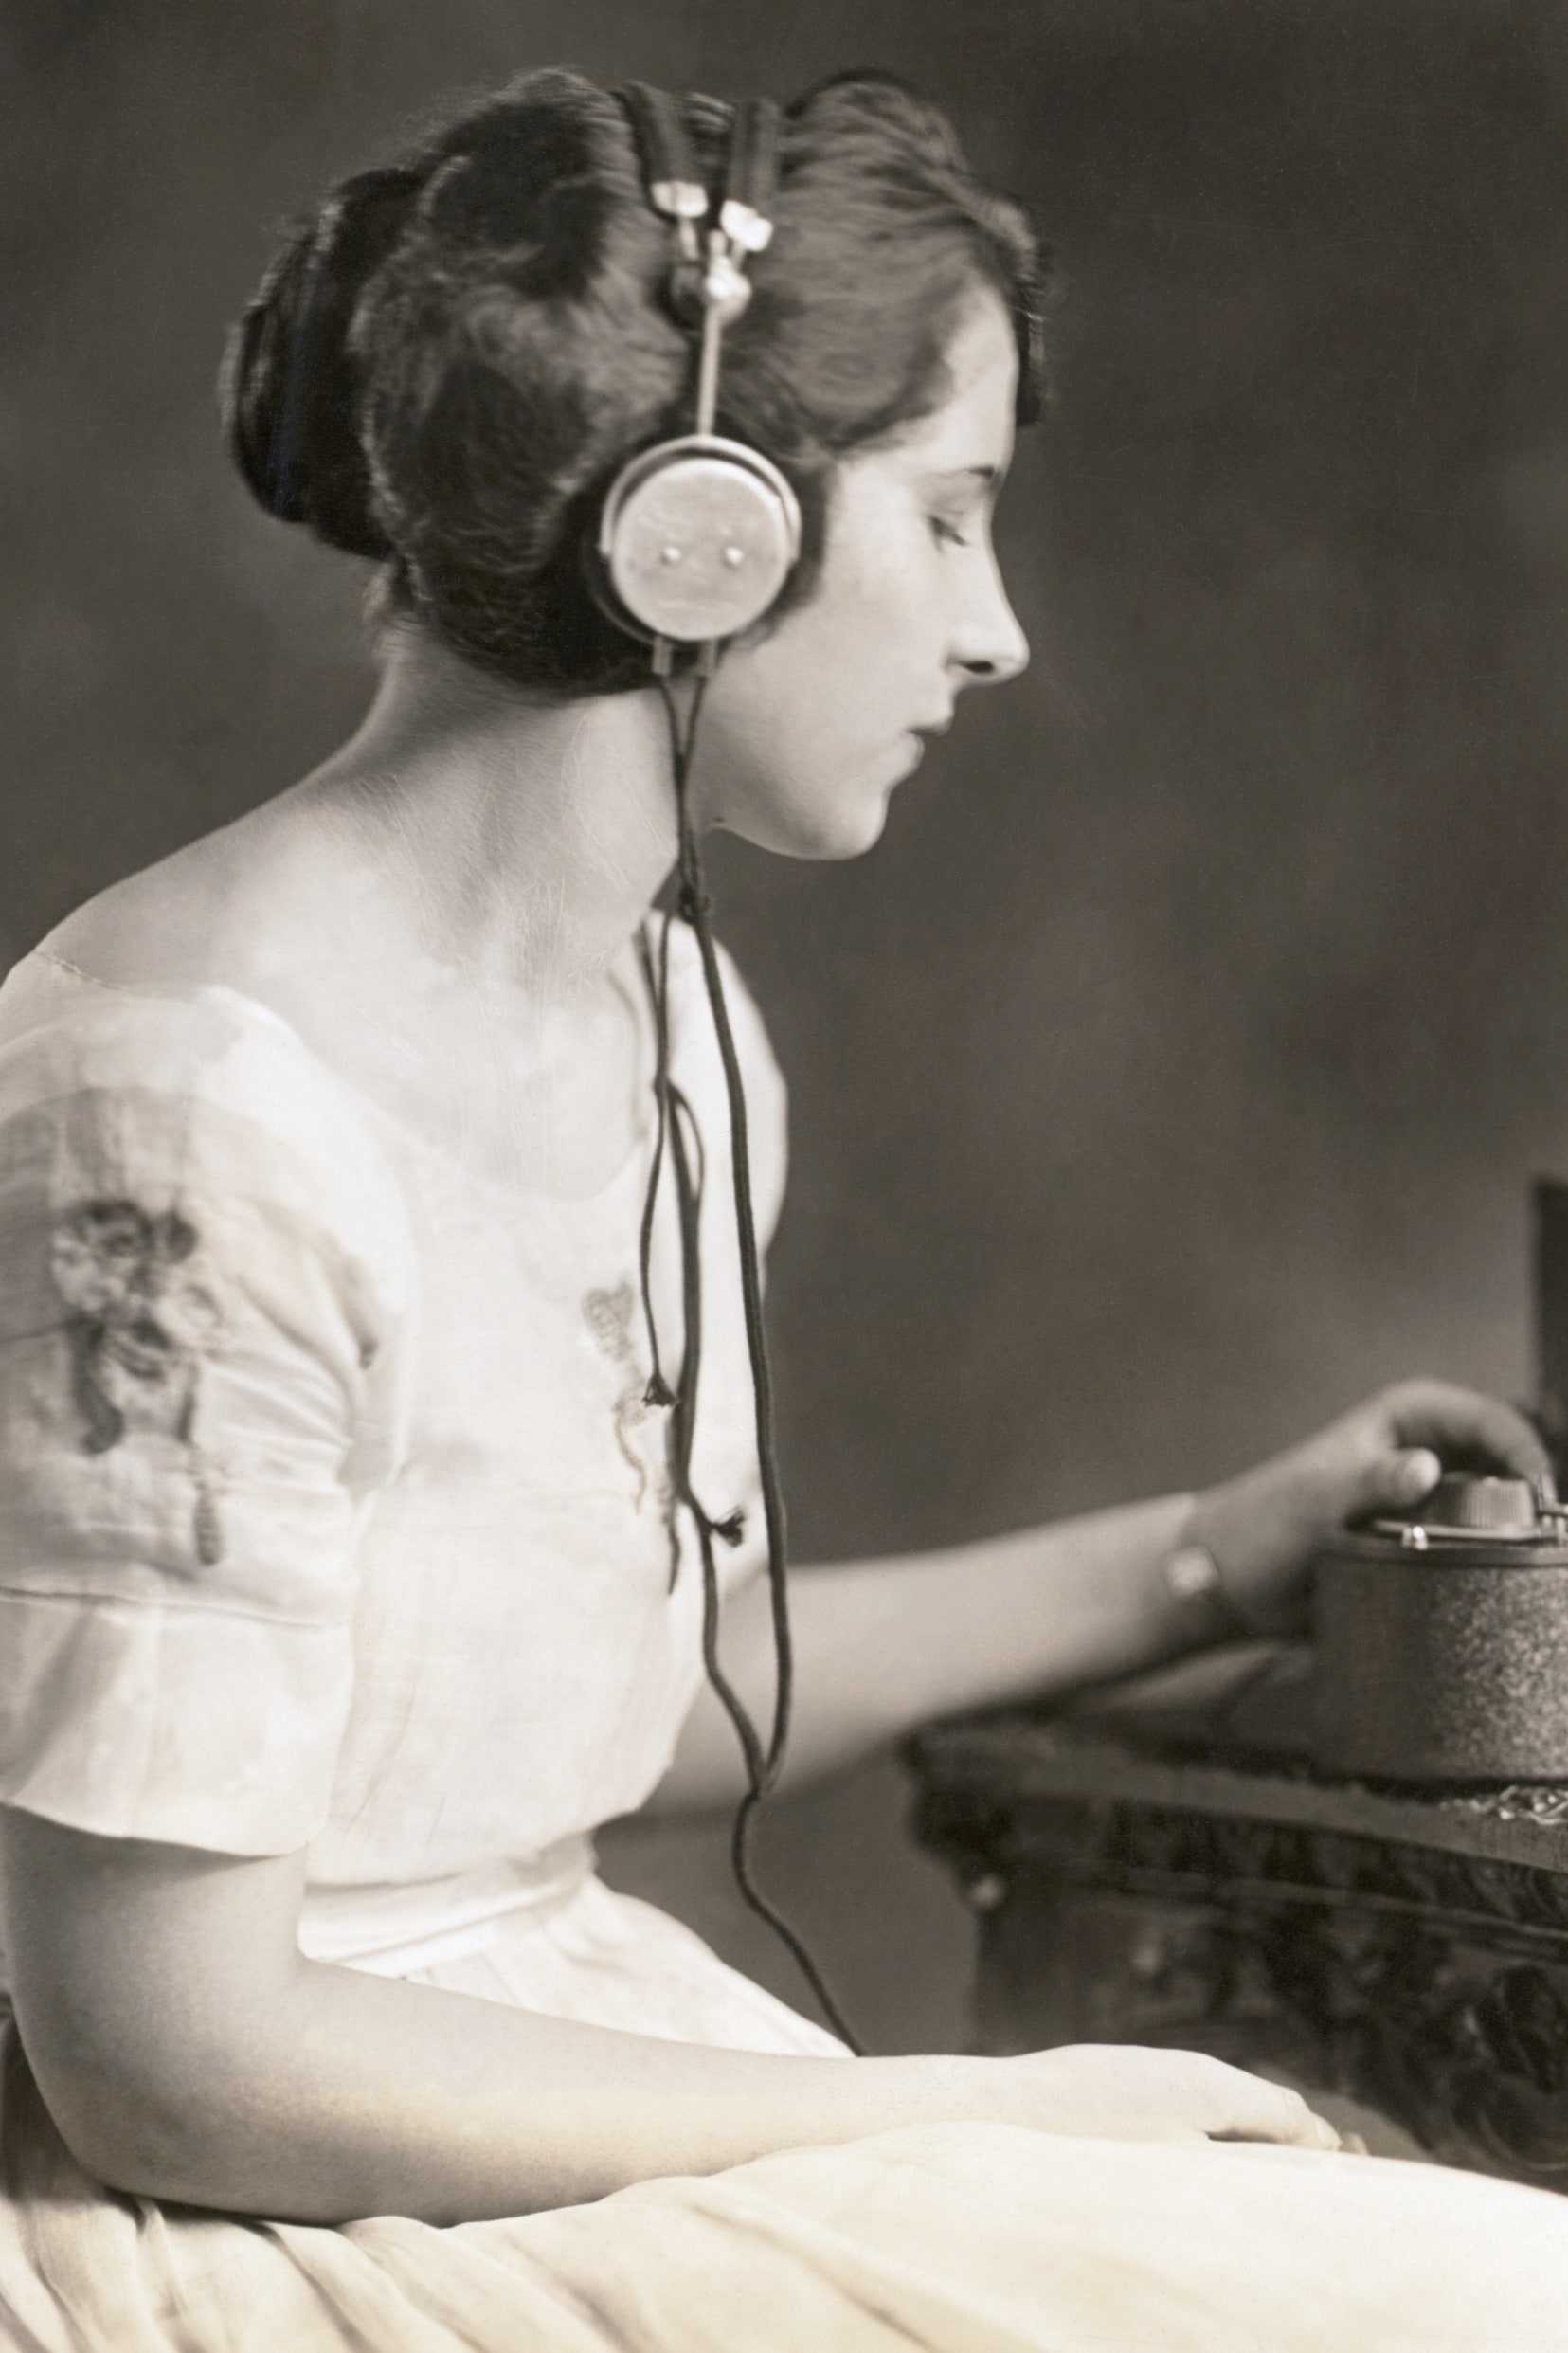 Evelyn C. Lewis Miss Washington 1921 listens to the radio. She tunes in by adjusting the condenser.